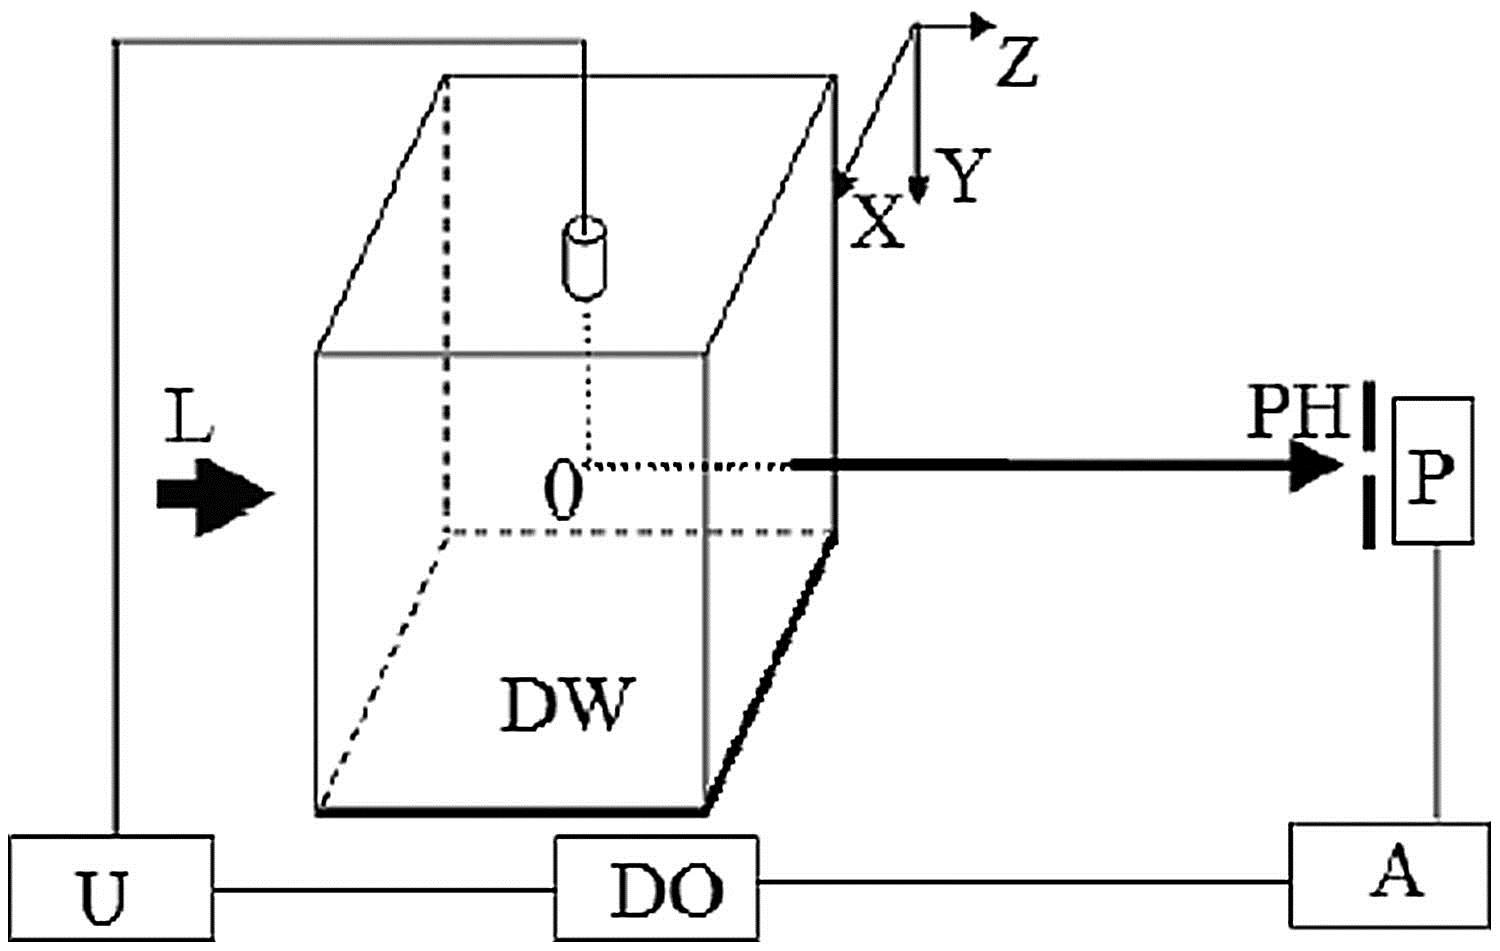 Schematic diagram of the experimental setup. U: ultrasonic transducer and its driver; DO: digital oscilloscope; A: amplifier; P: photomultiplier; PH: pinhole; DW: distilled water; L: laser.